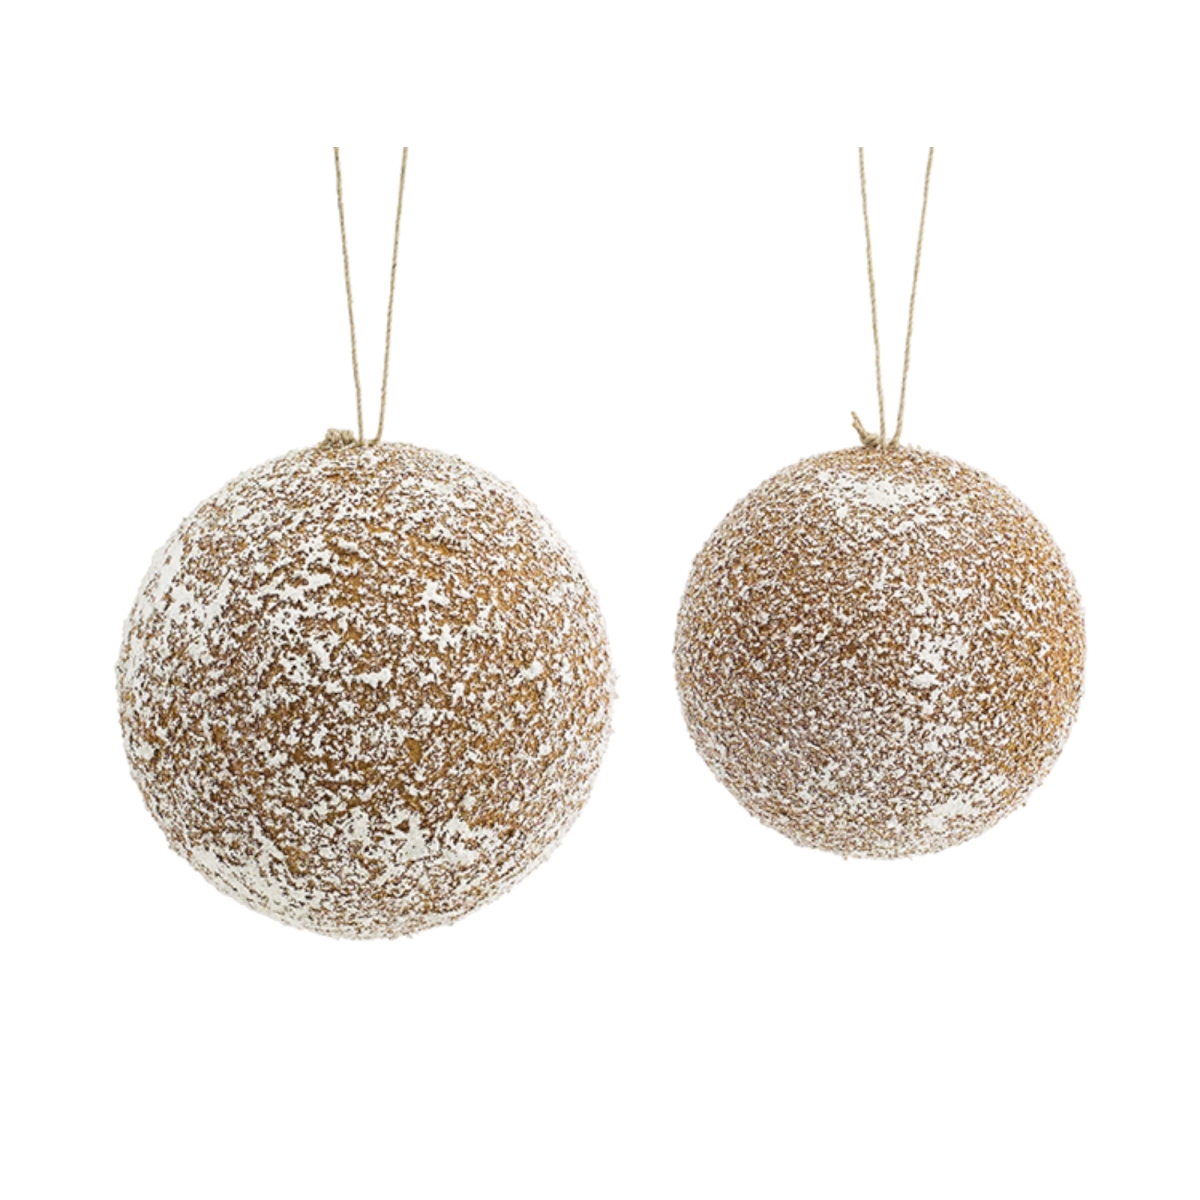 72951ds 5-6 In. Foam Ball Ornament, Brown & White - Set Of 8